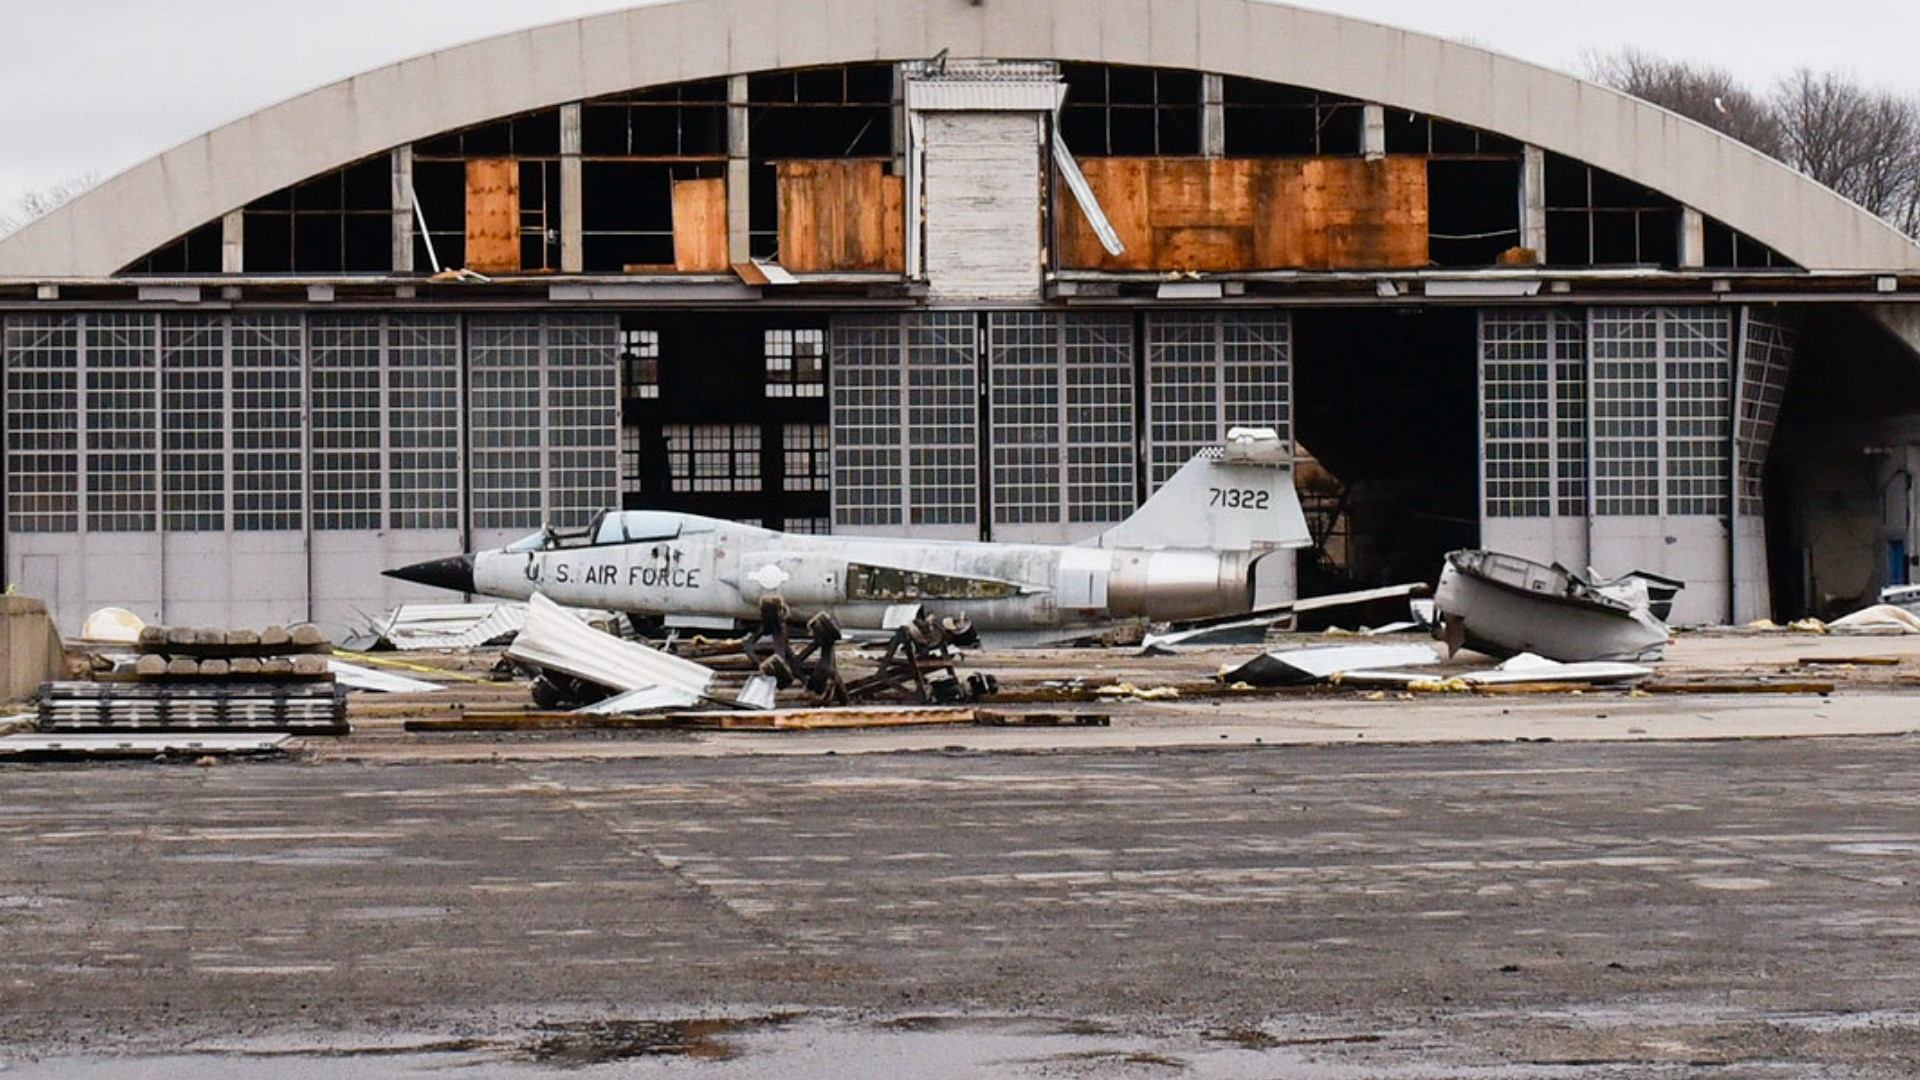 The base said the tornado hit the National Museum of the U.S. Air Force's Restoration Hangar 4 and several other buildings.